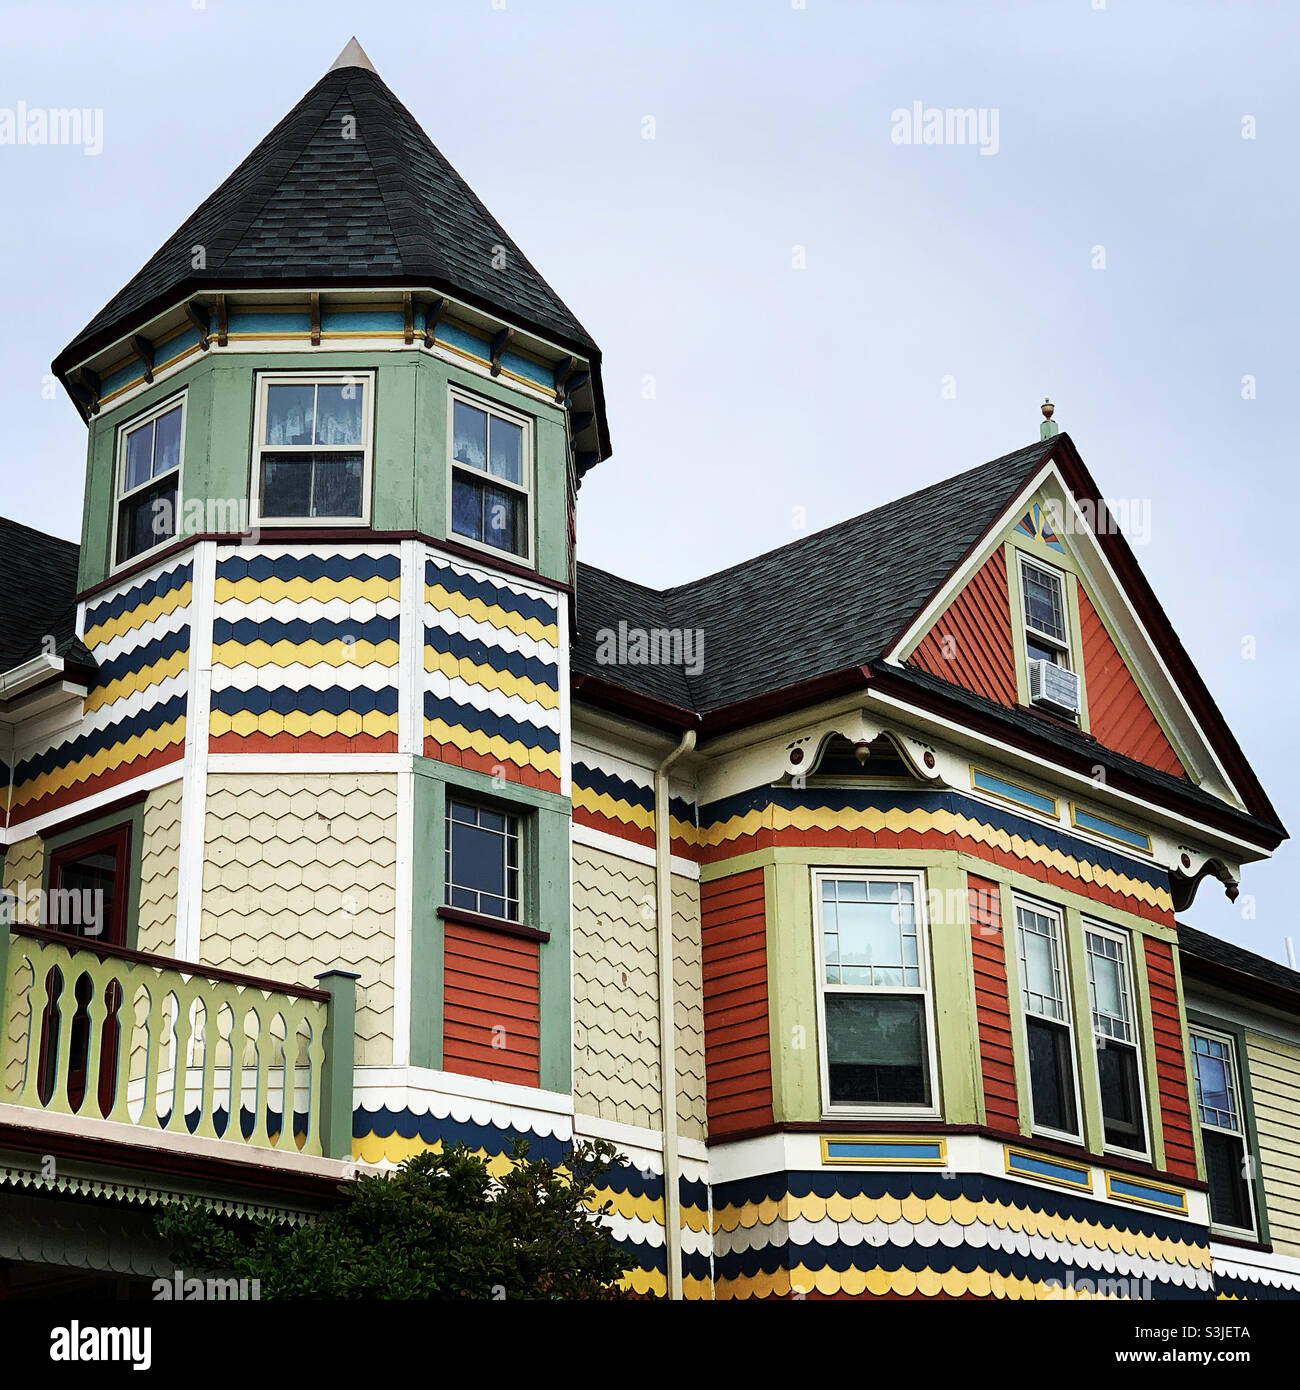 August 2021, Details eines Hauses in Ocean Grove, Neptune Township, Monmouth County, New Jersey, USA Stockfoto